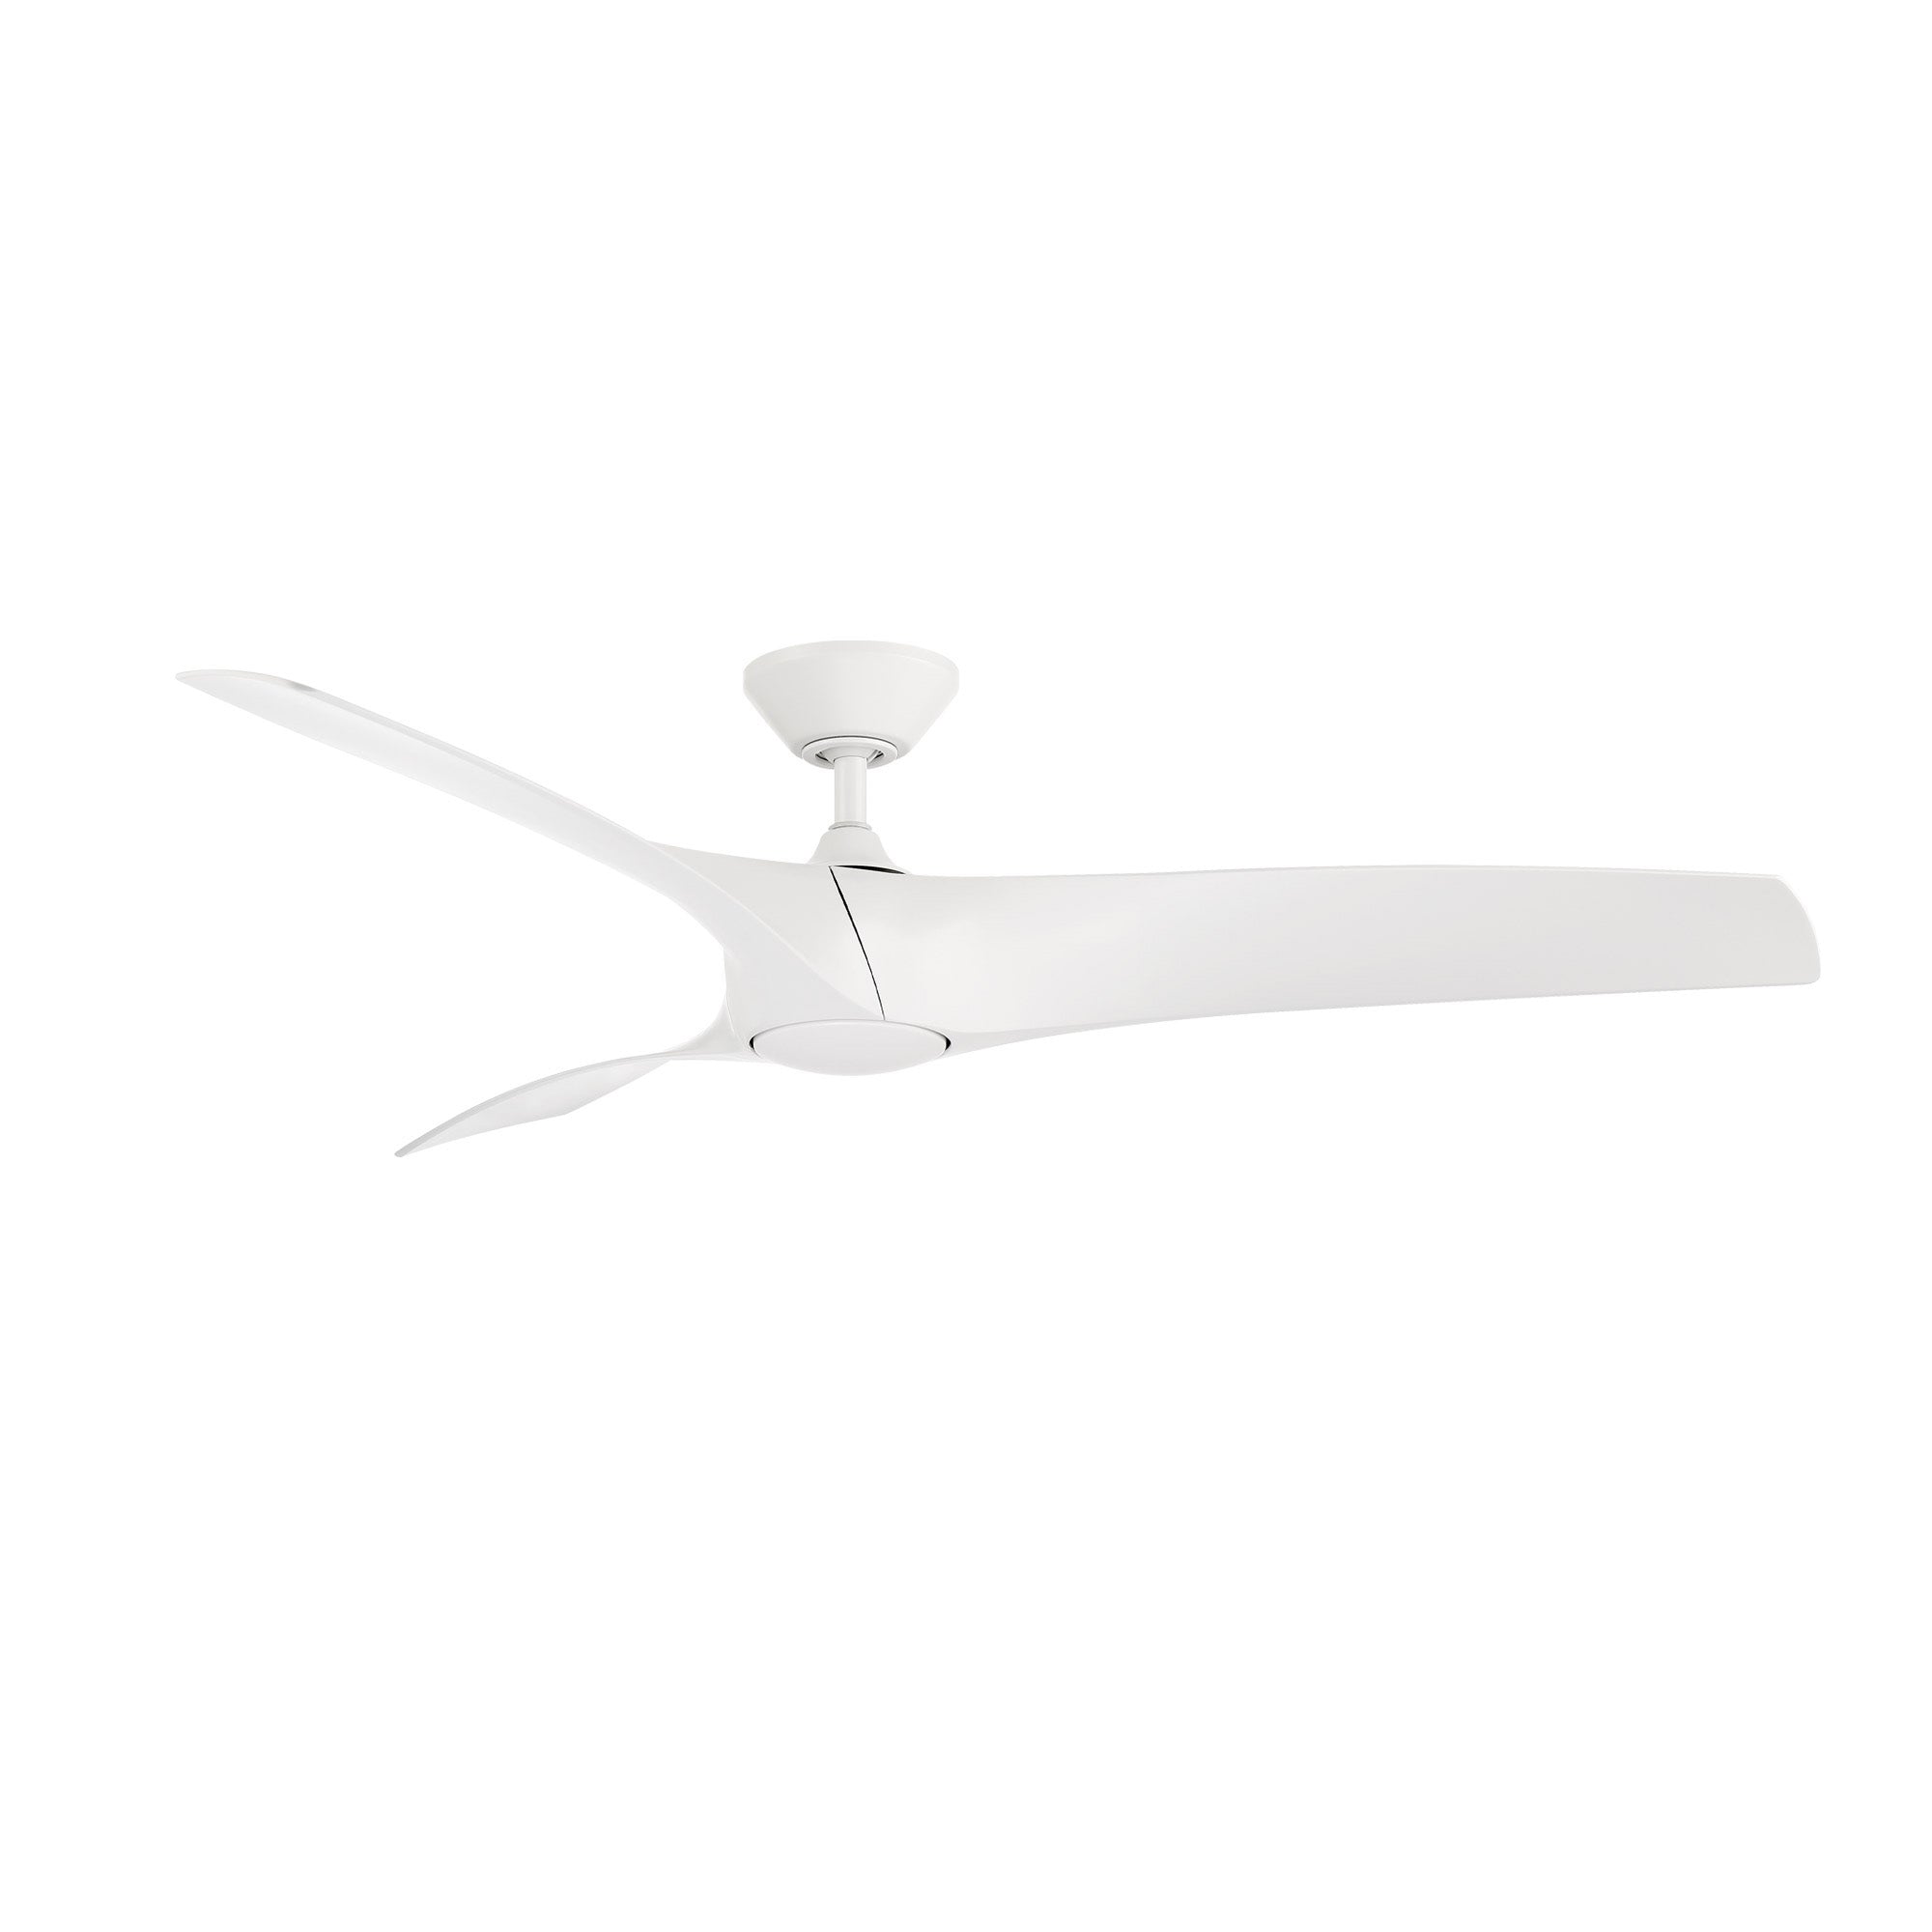 Zephyr Indoor/Outdoor 3-Blade 52" Smart Ceiling Fan with LED Light Kit and Remote Control